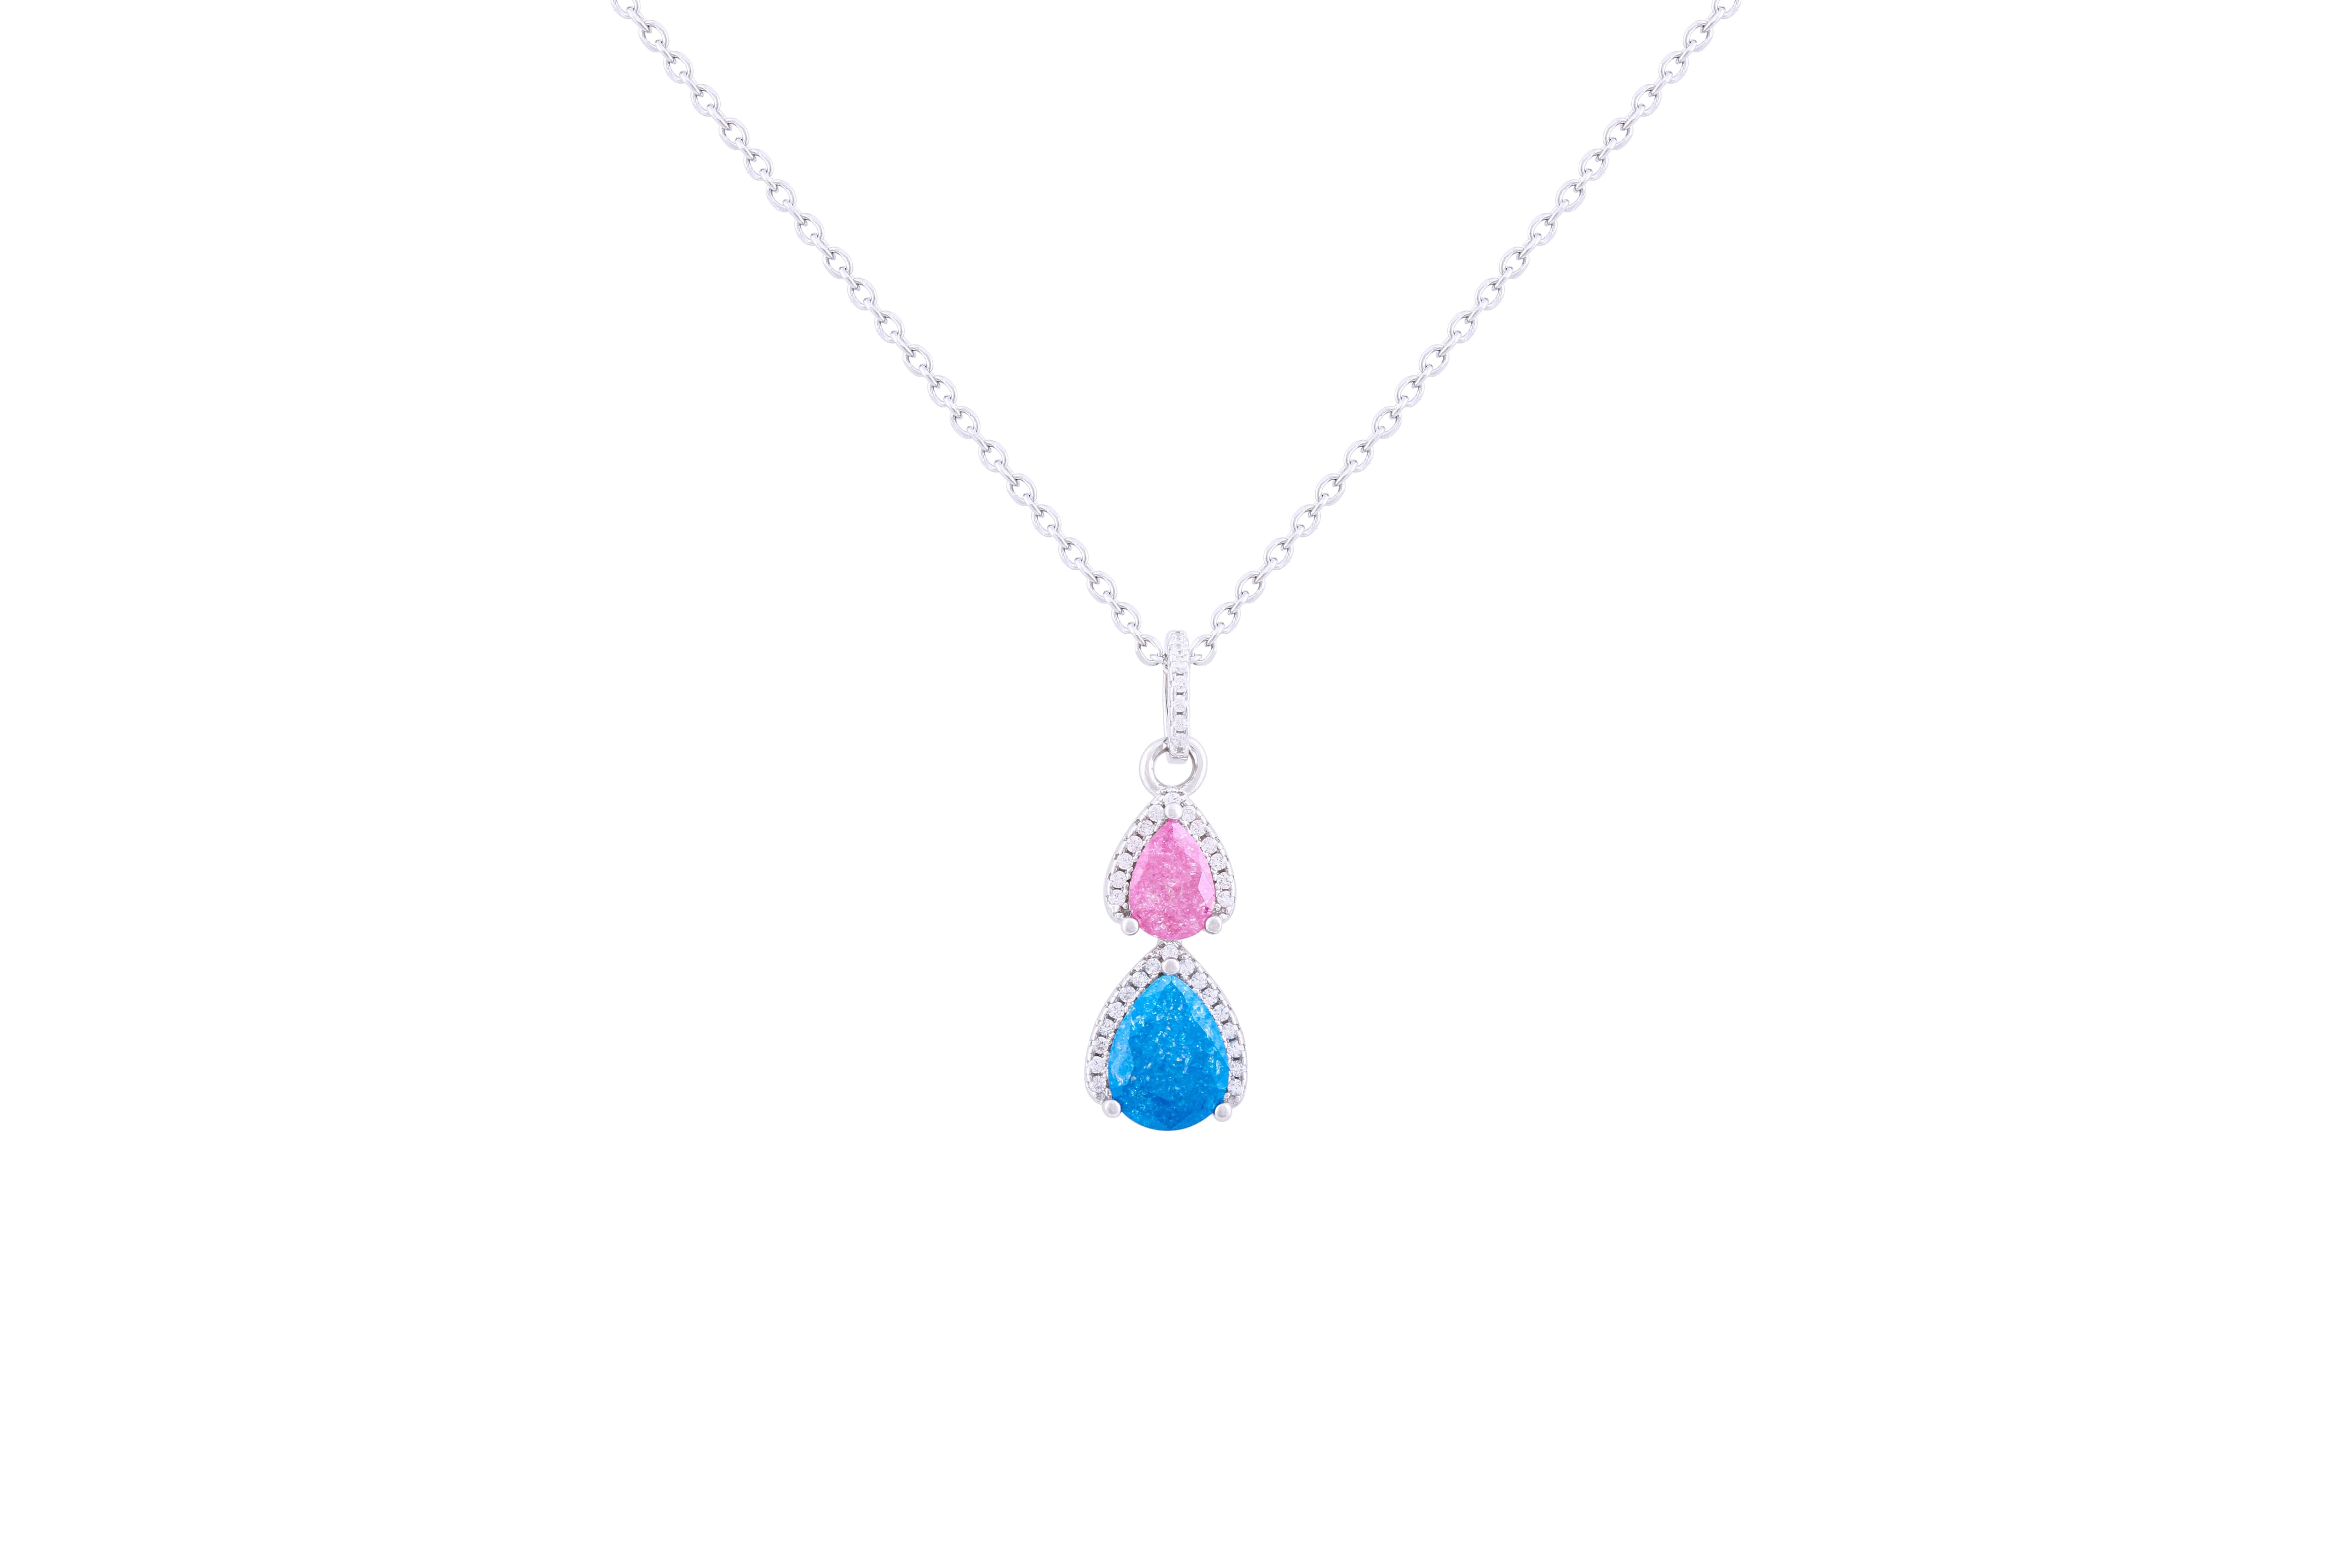 Asfour 925 Sterling Silver Necklace With Rose & Aquamarine Pear Pendant NR0499-BO-A